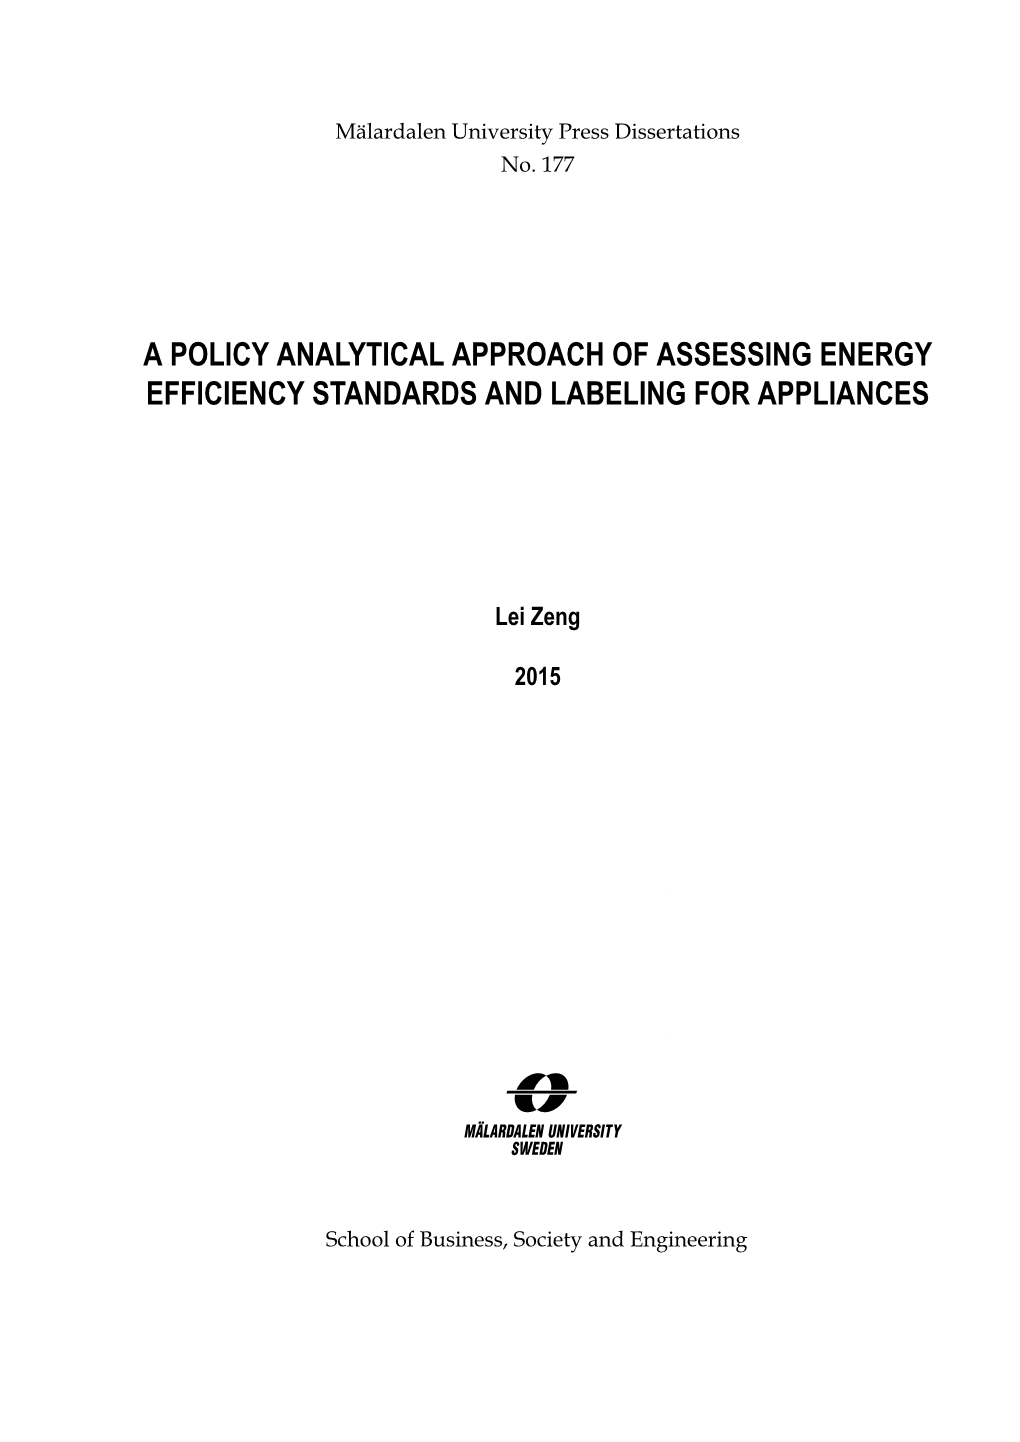 A Policy Analytical Approach of Assessing Energy Efficiency Standards and Labeling for Appliances